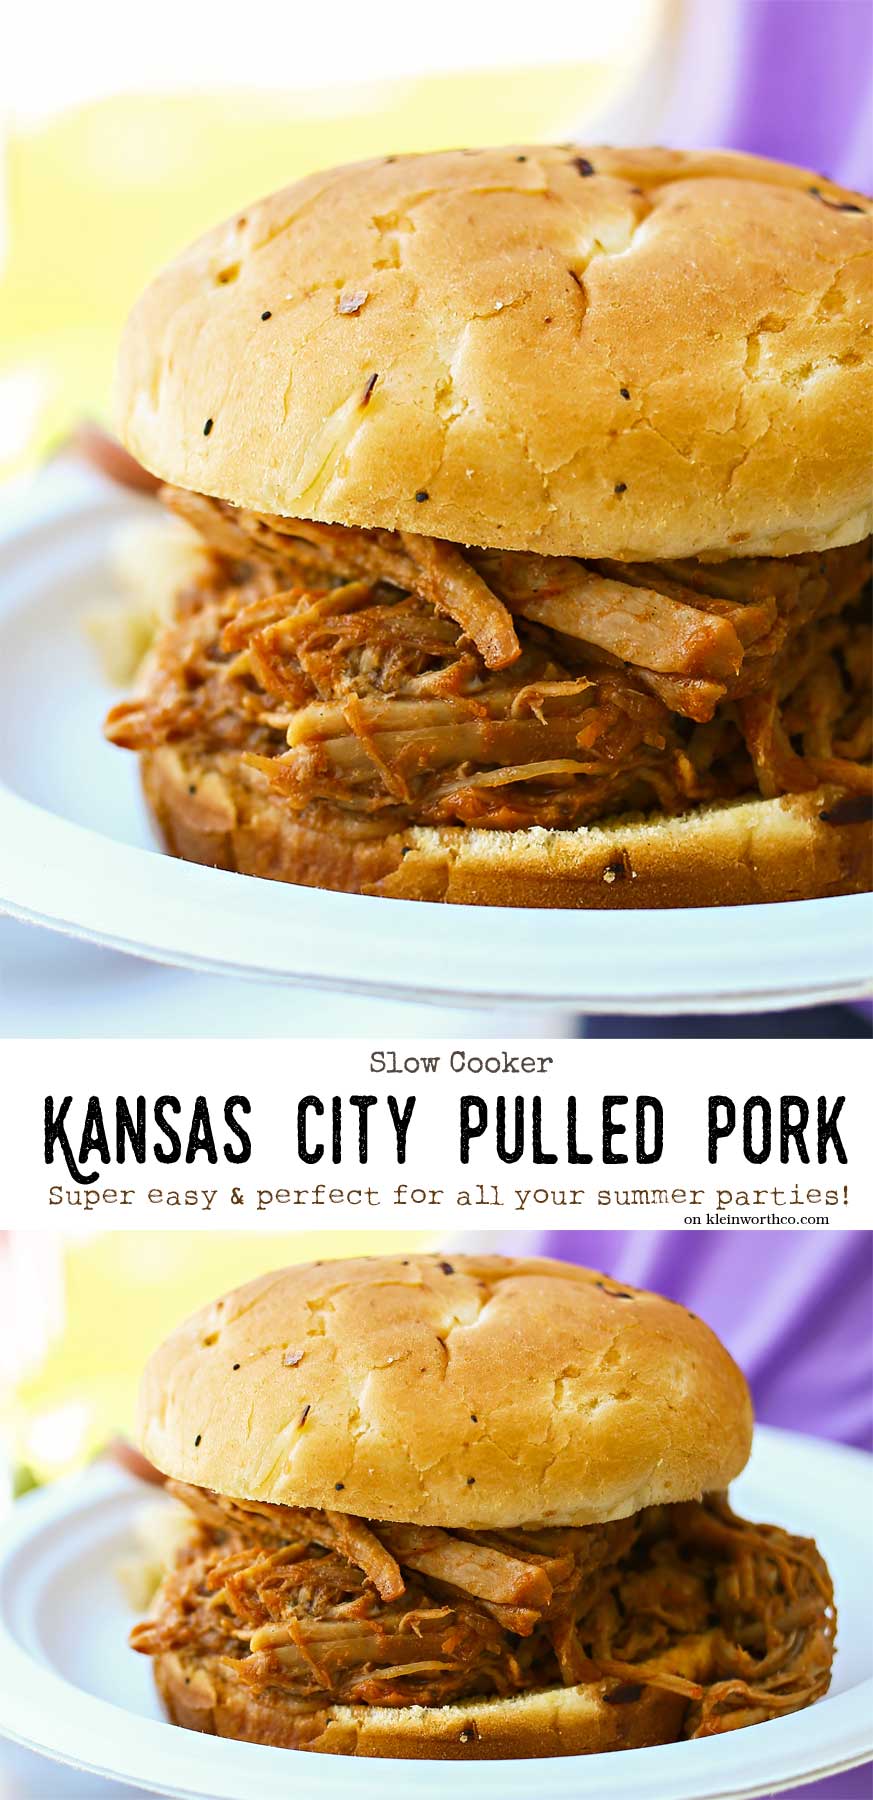 Kansas City Pulled Pork is almost effortless because it's made in the slow cooker. YUM-O!